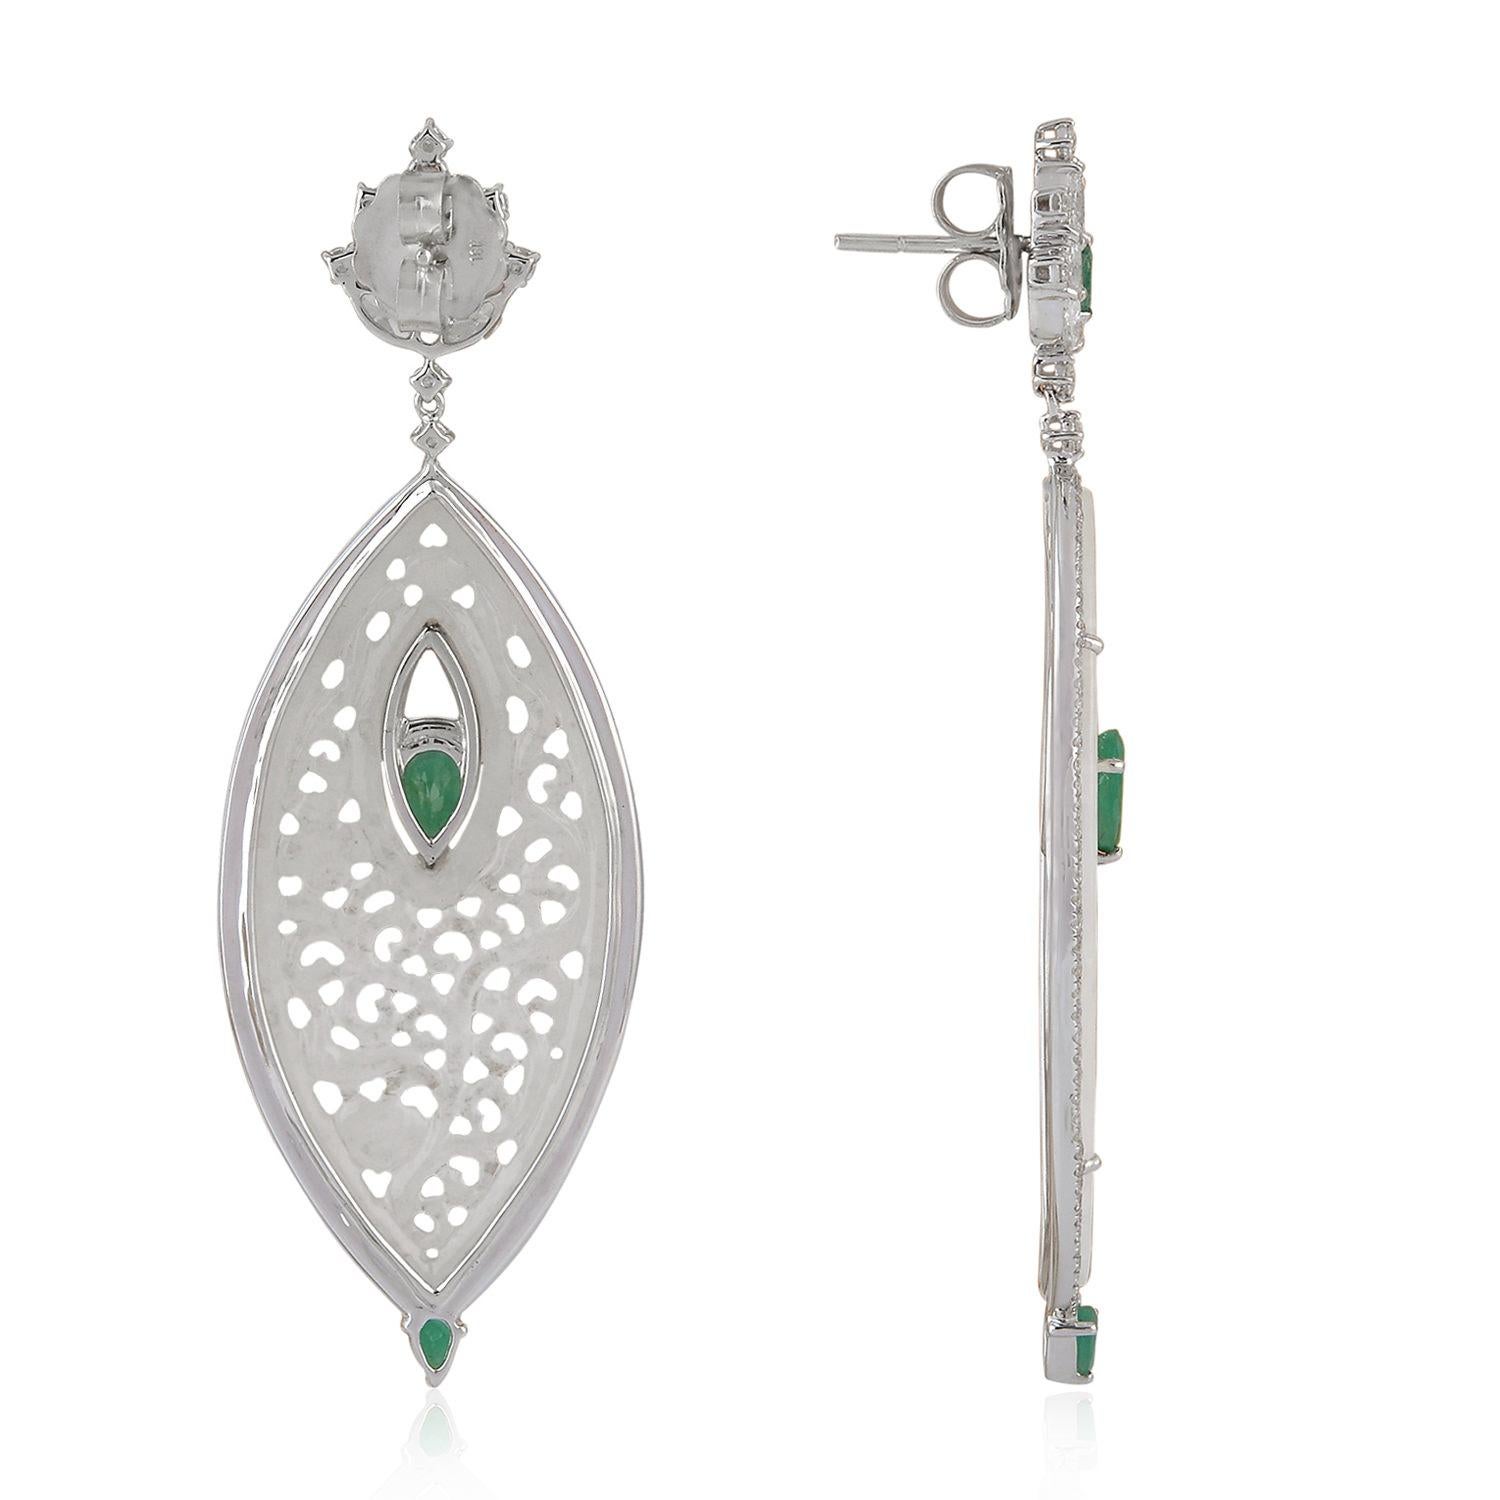 These stunning hand carved Jade earrings are thoughtfully and meticulously crafted in 18-karat white gold. It is set in 26.04 carats Jade, 1.99 carats emerald and 2.79 carats of sparkling diamonds.

FOLLOW  MEGHNA JEWELS storefront to view the